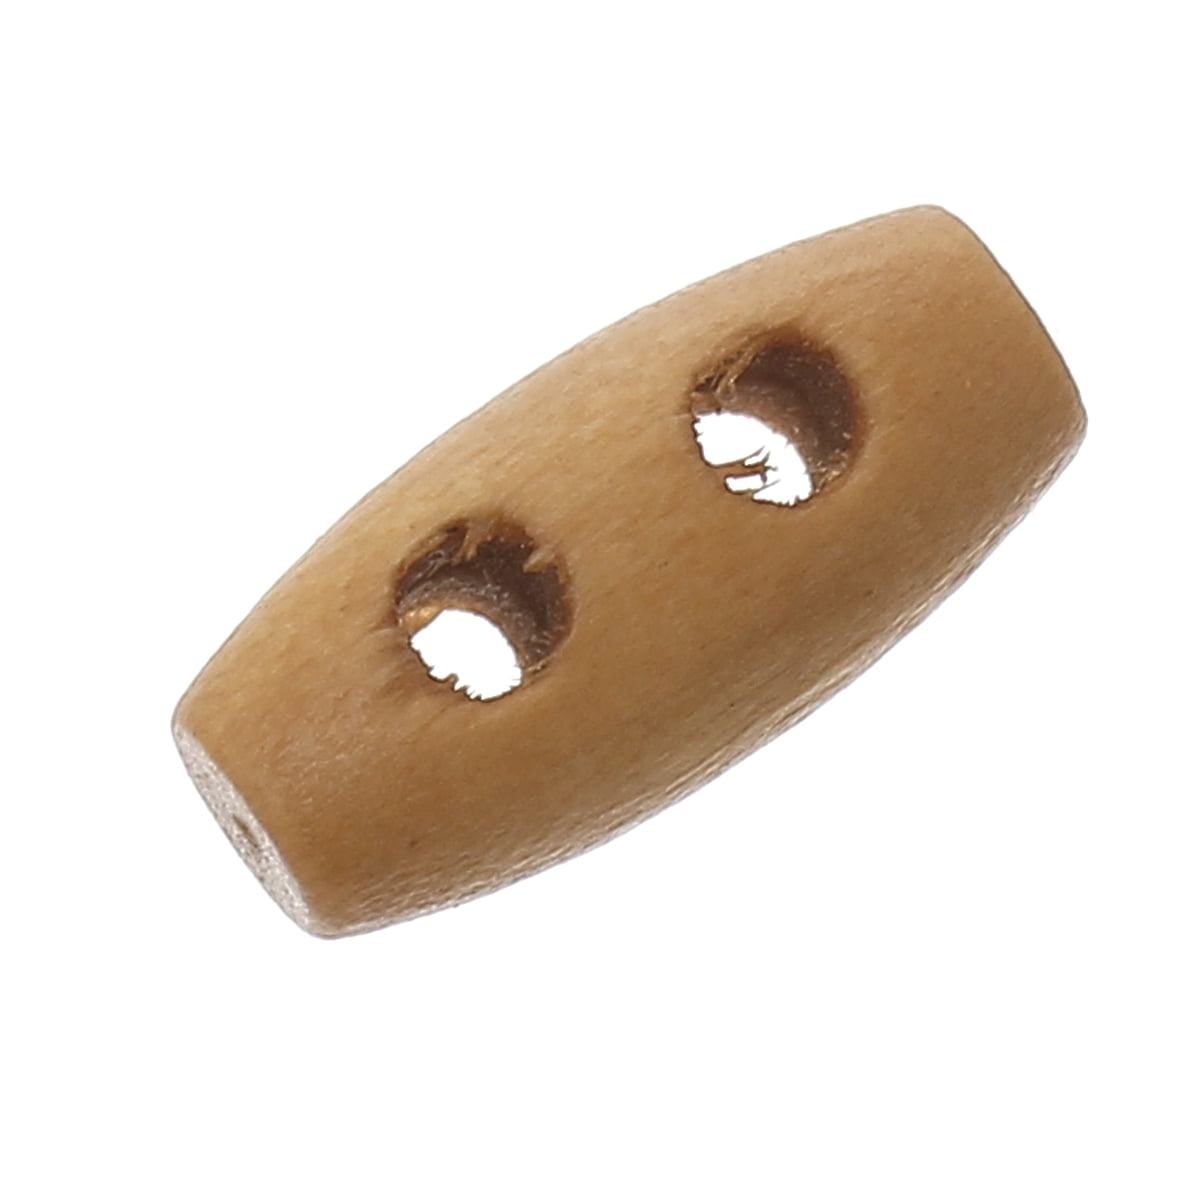 100 Small Wood Toggle Buttons 5/8 x 1/4 Inch RB64540 - Walmart.com